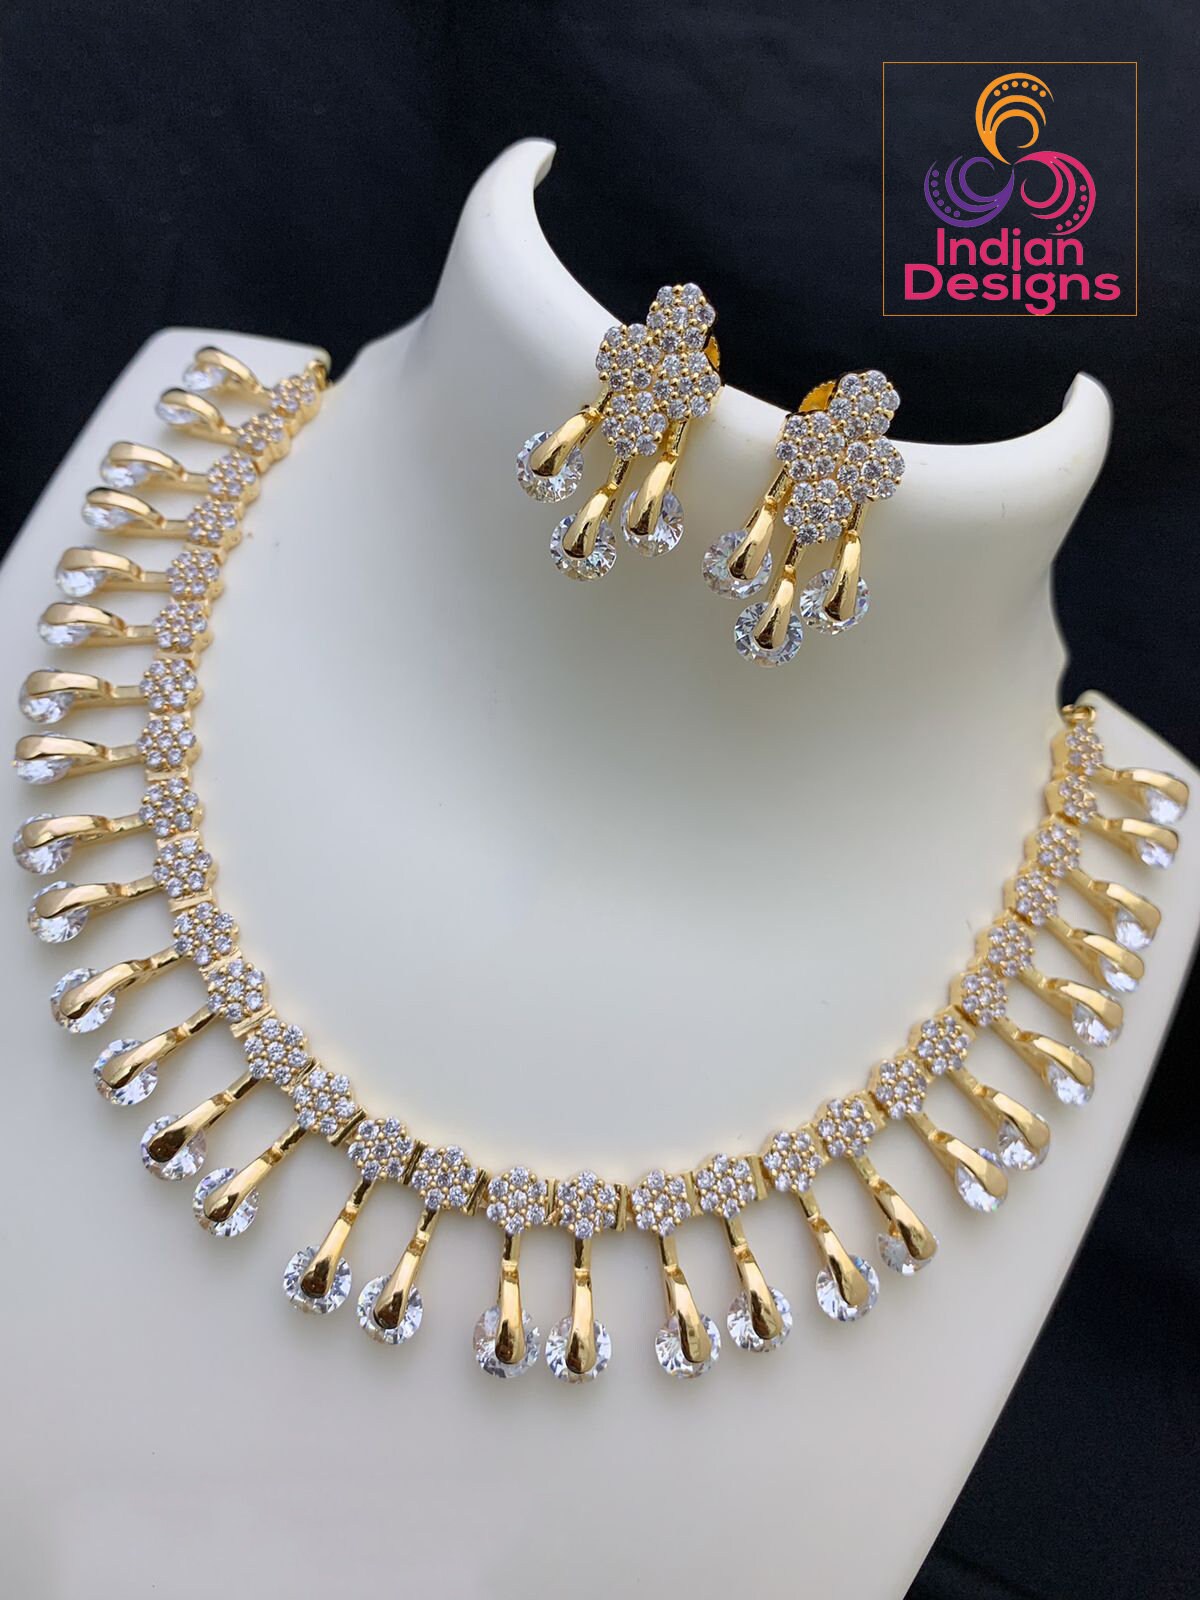 Unique and Exclusive CZ American Diamond necklace Earring set | Gold-plated American diamond necklace set with earrings |